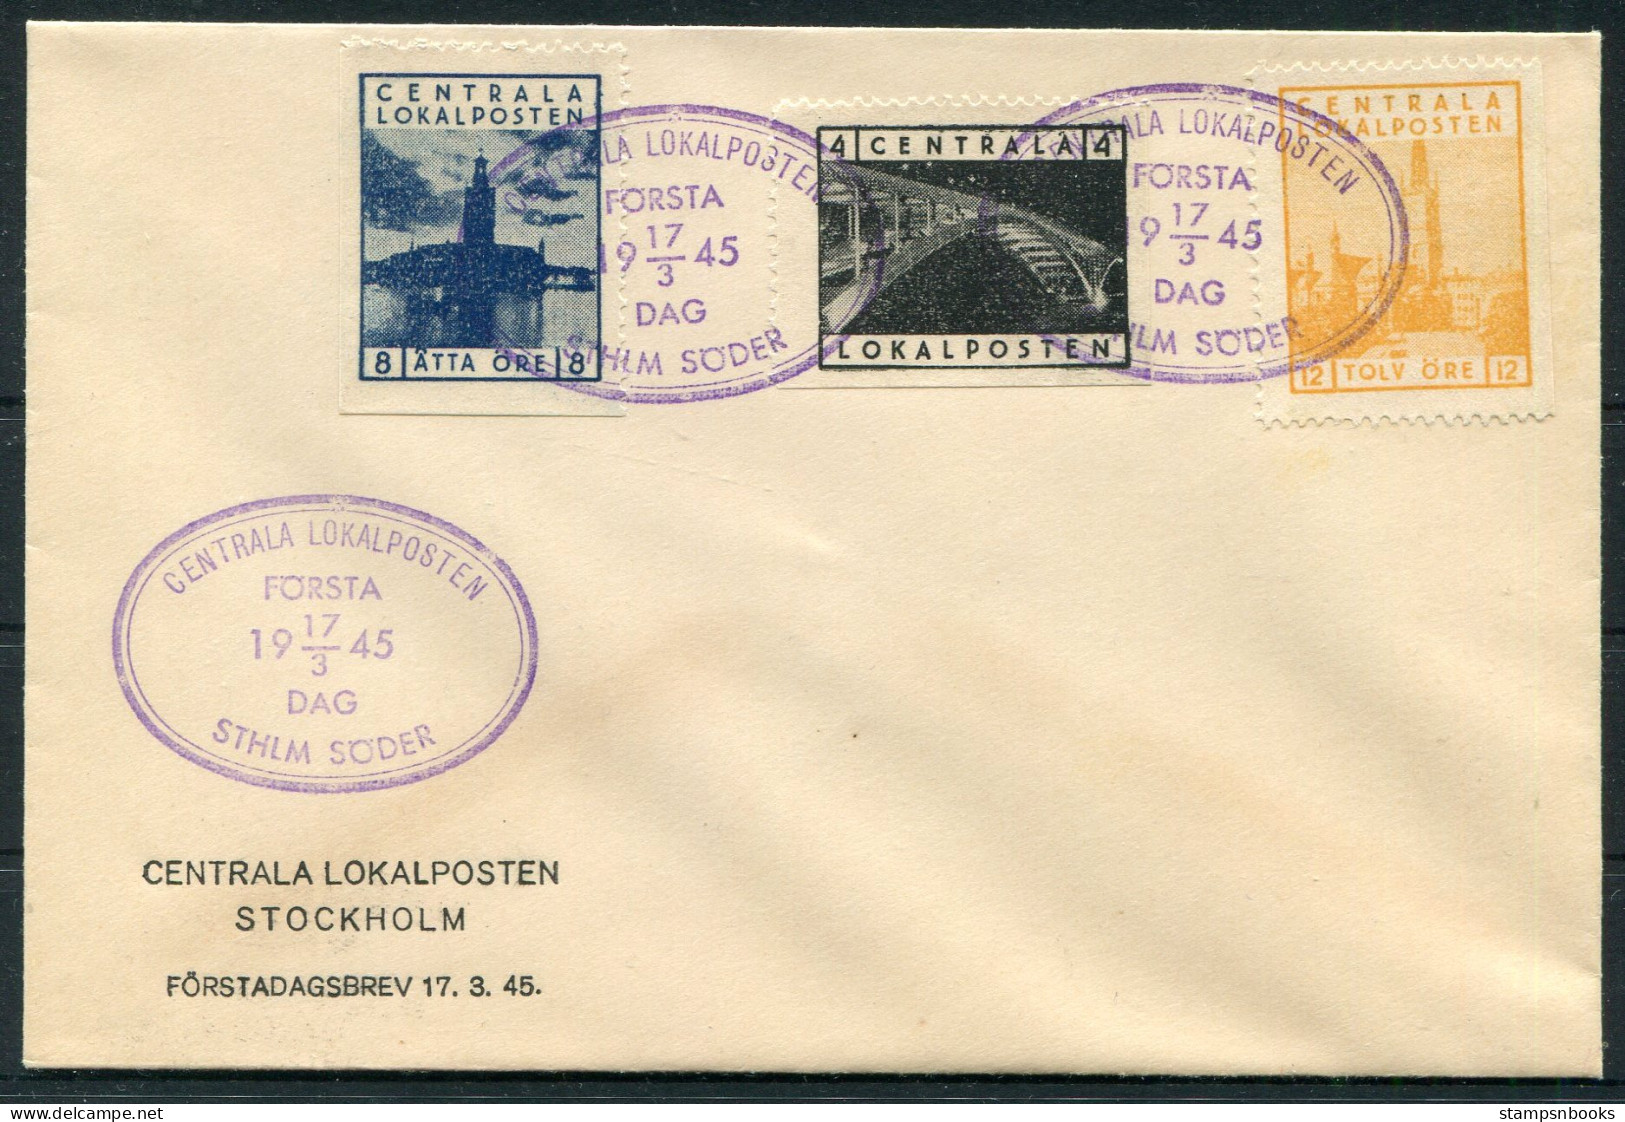 1945 Sweden Stockholm Centrala Lokalposten First Day Cover, Local Post FDC - Emisiones Locales